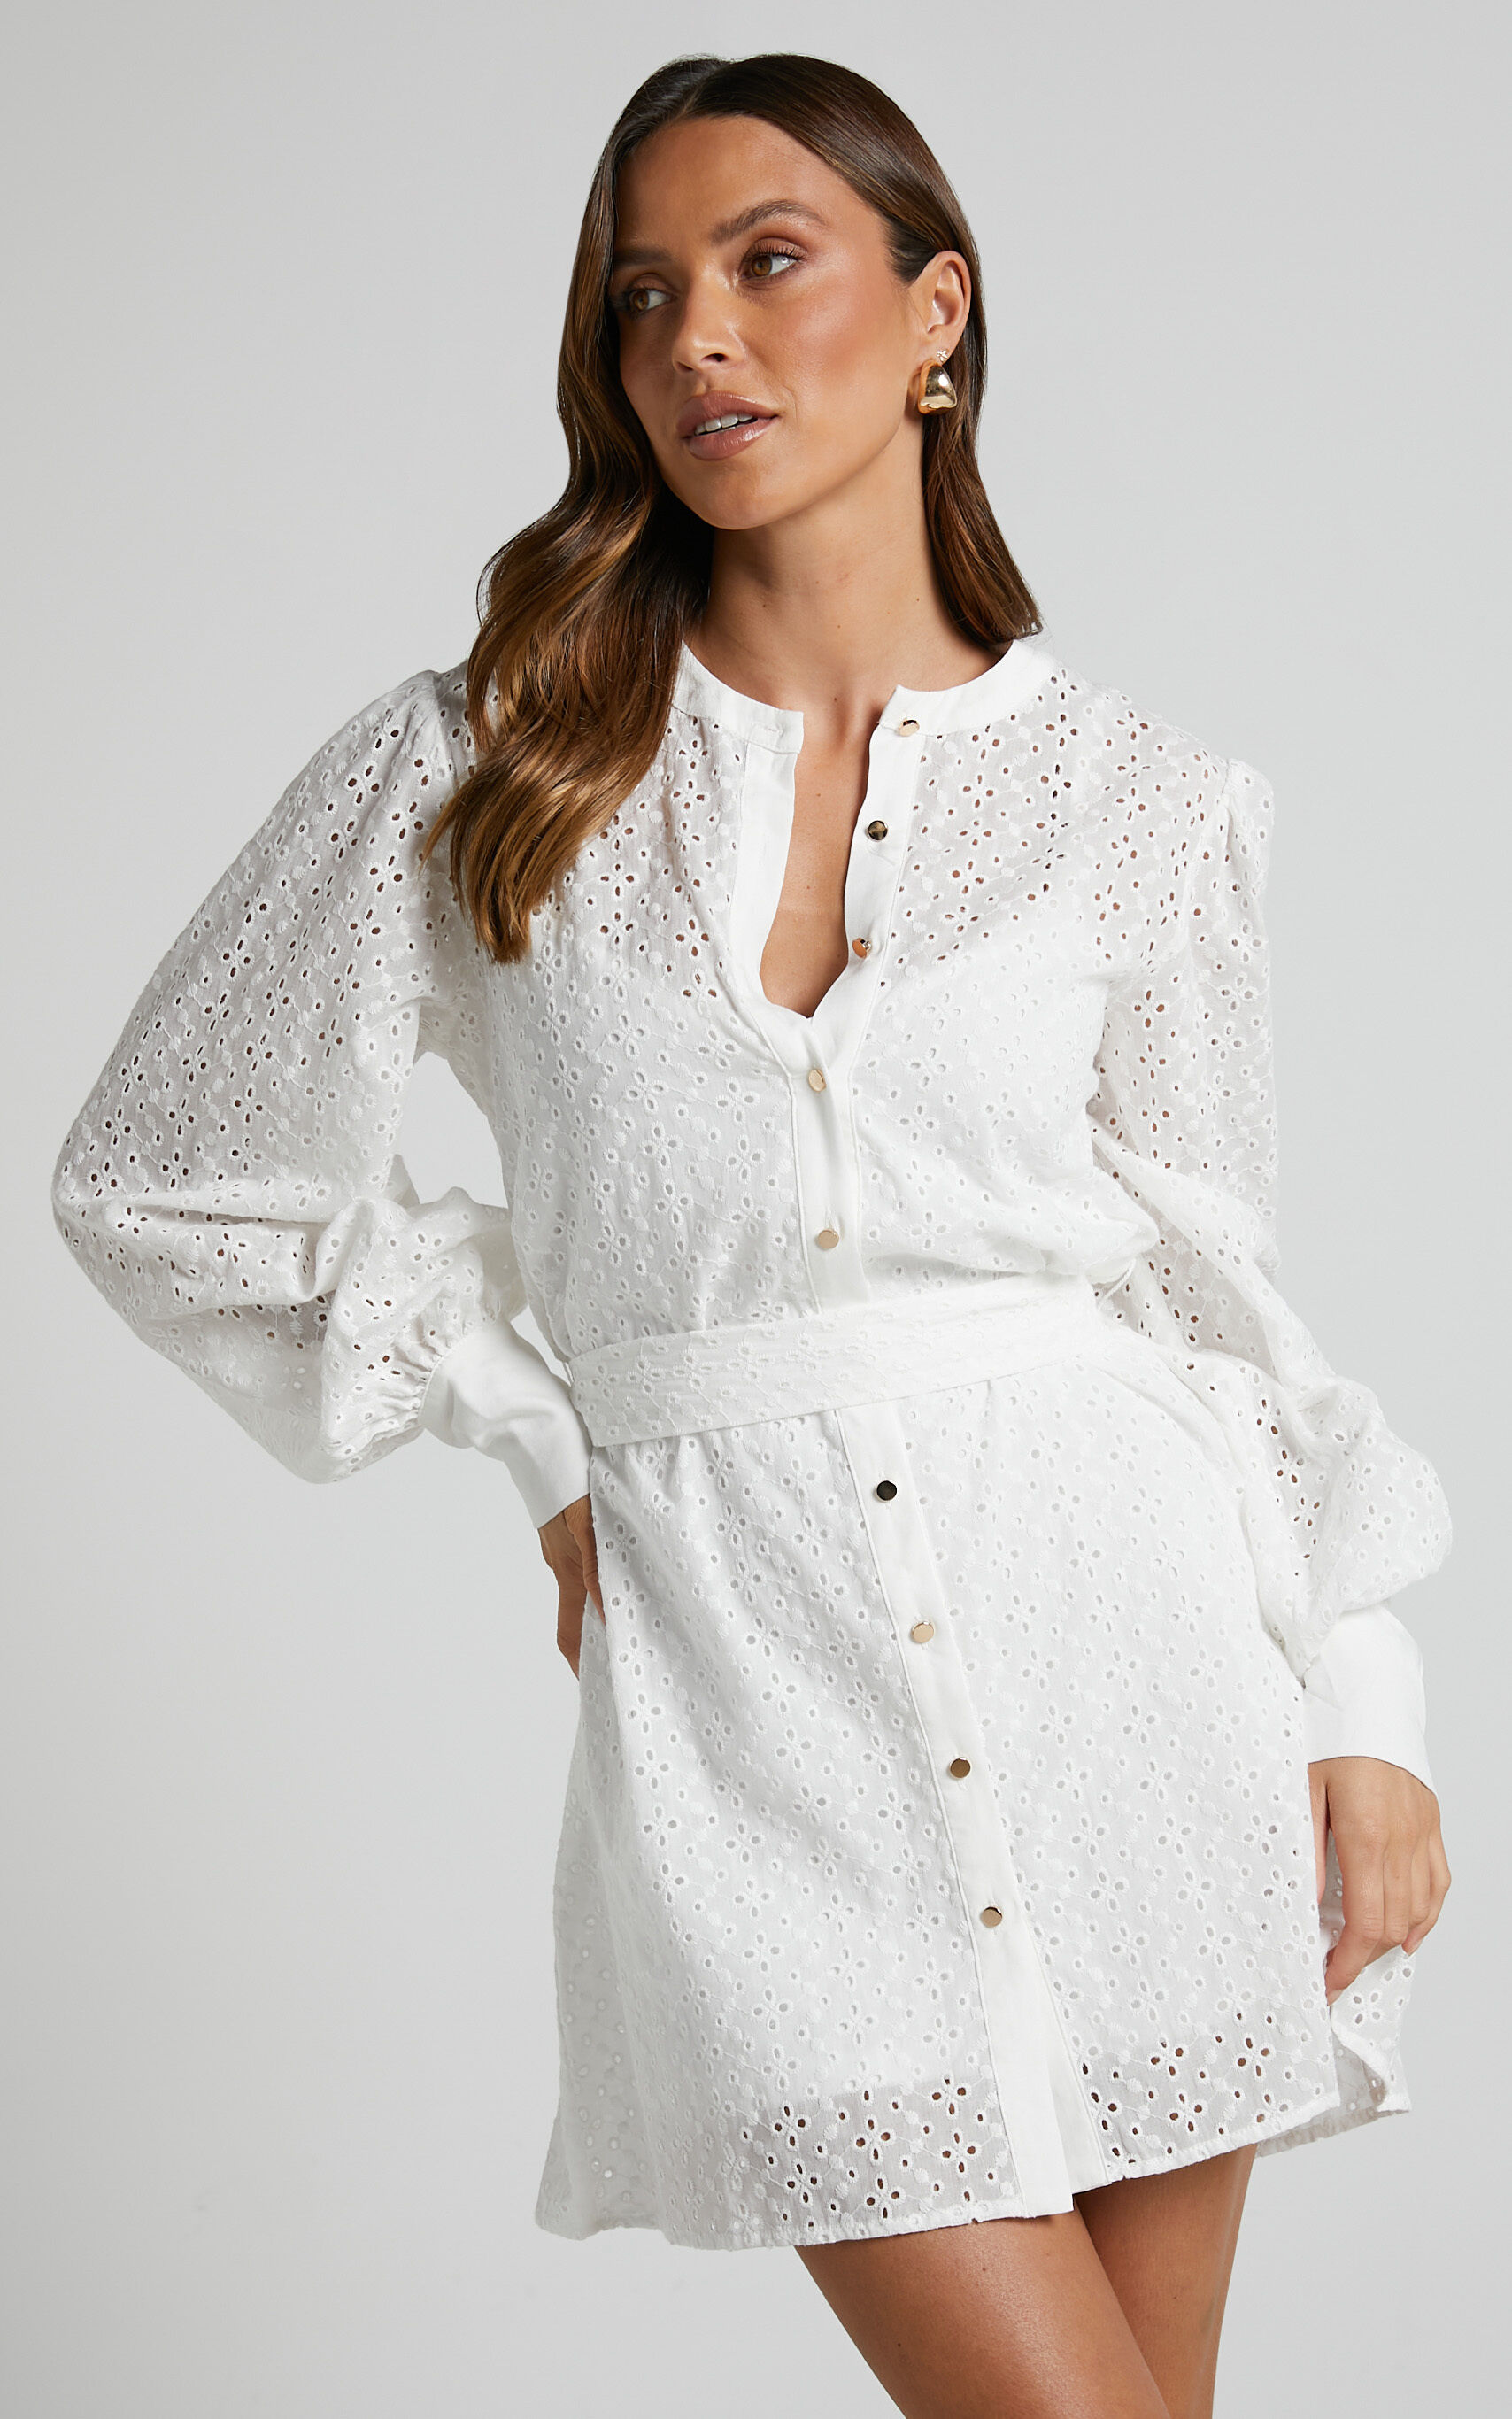 Felize Broderie Anglaise Mini Shirt Dress in White - 04, WHT1, super-hi-res image number null